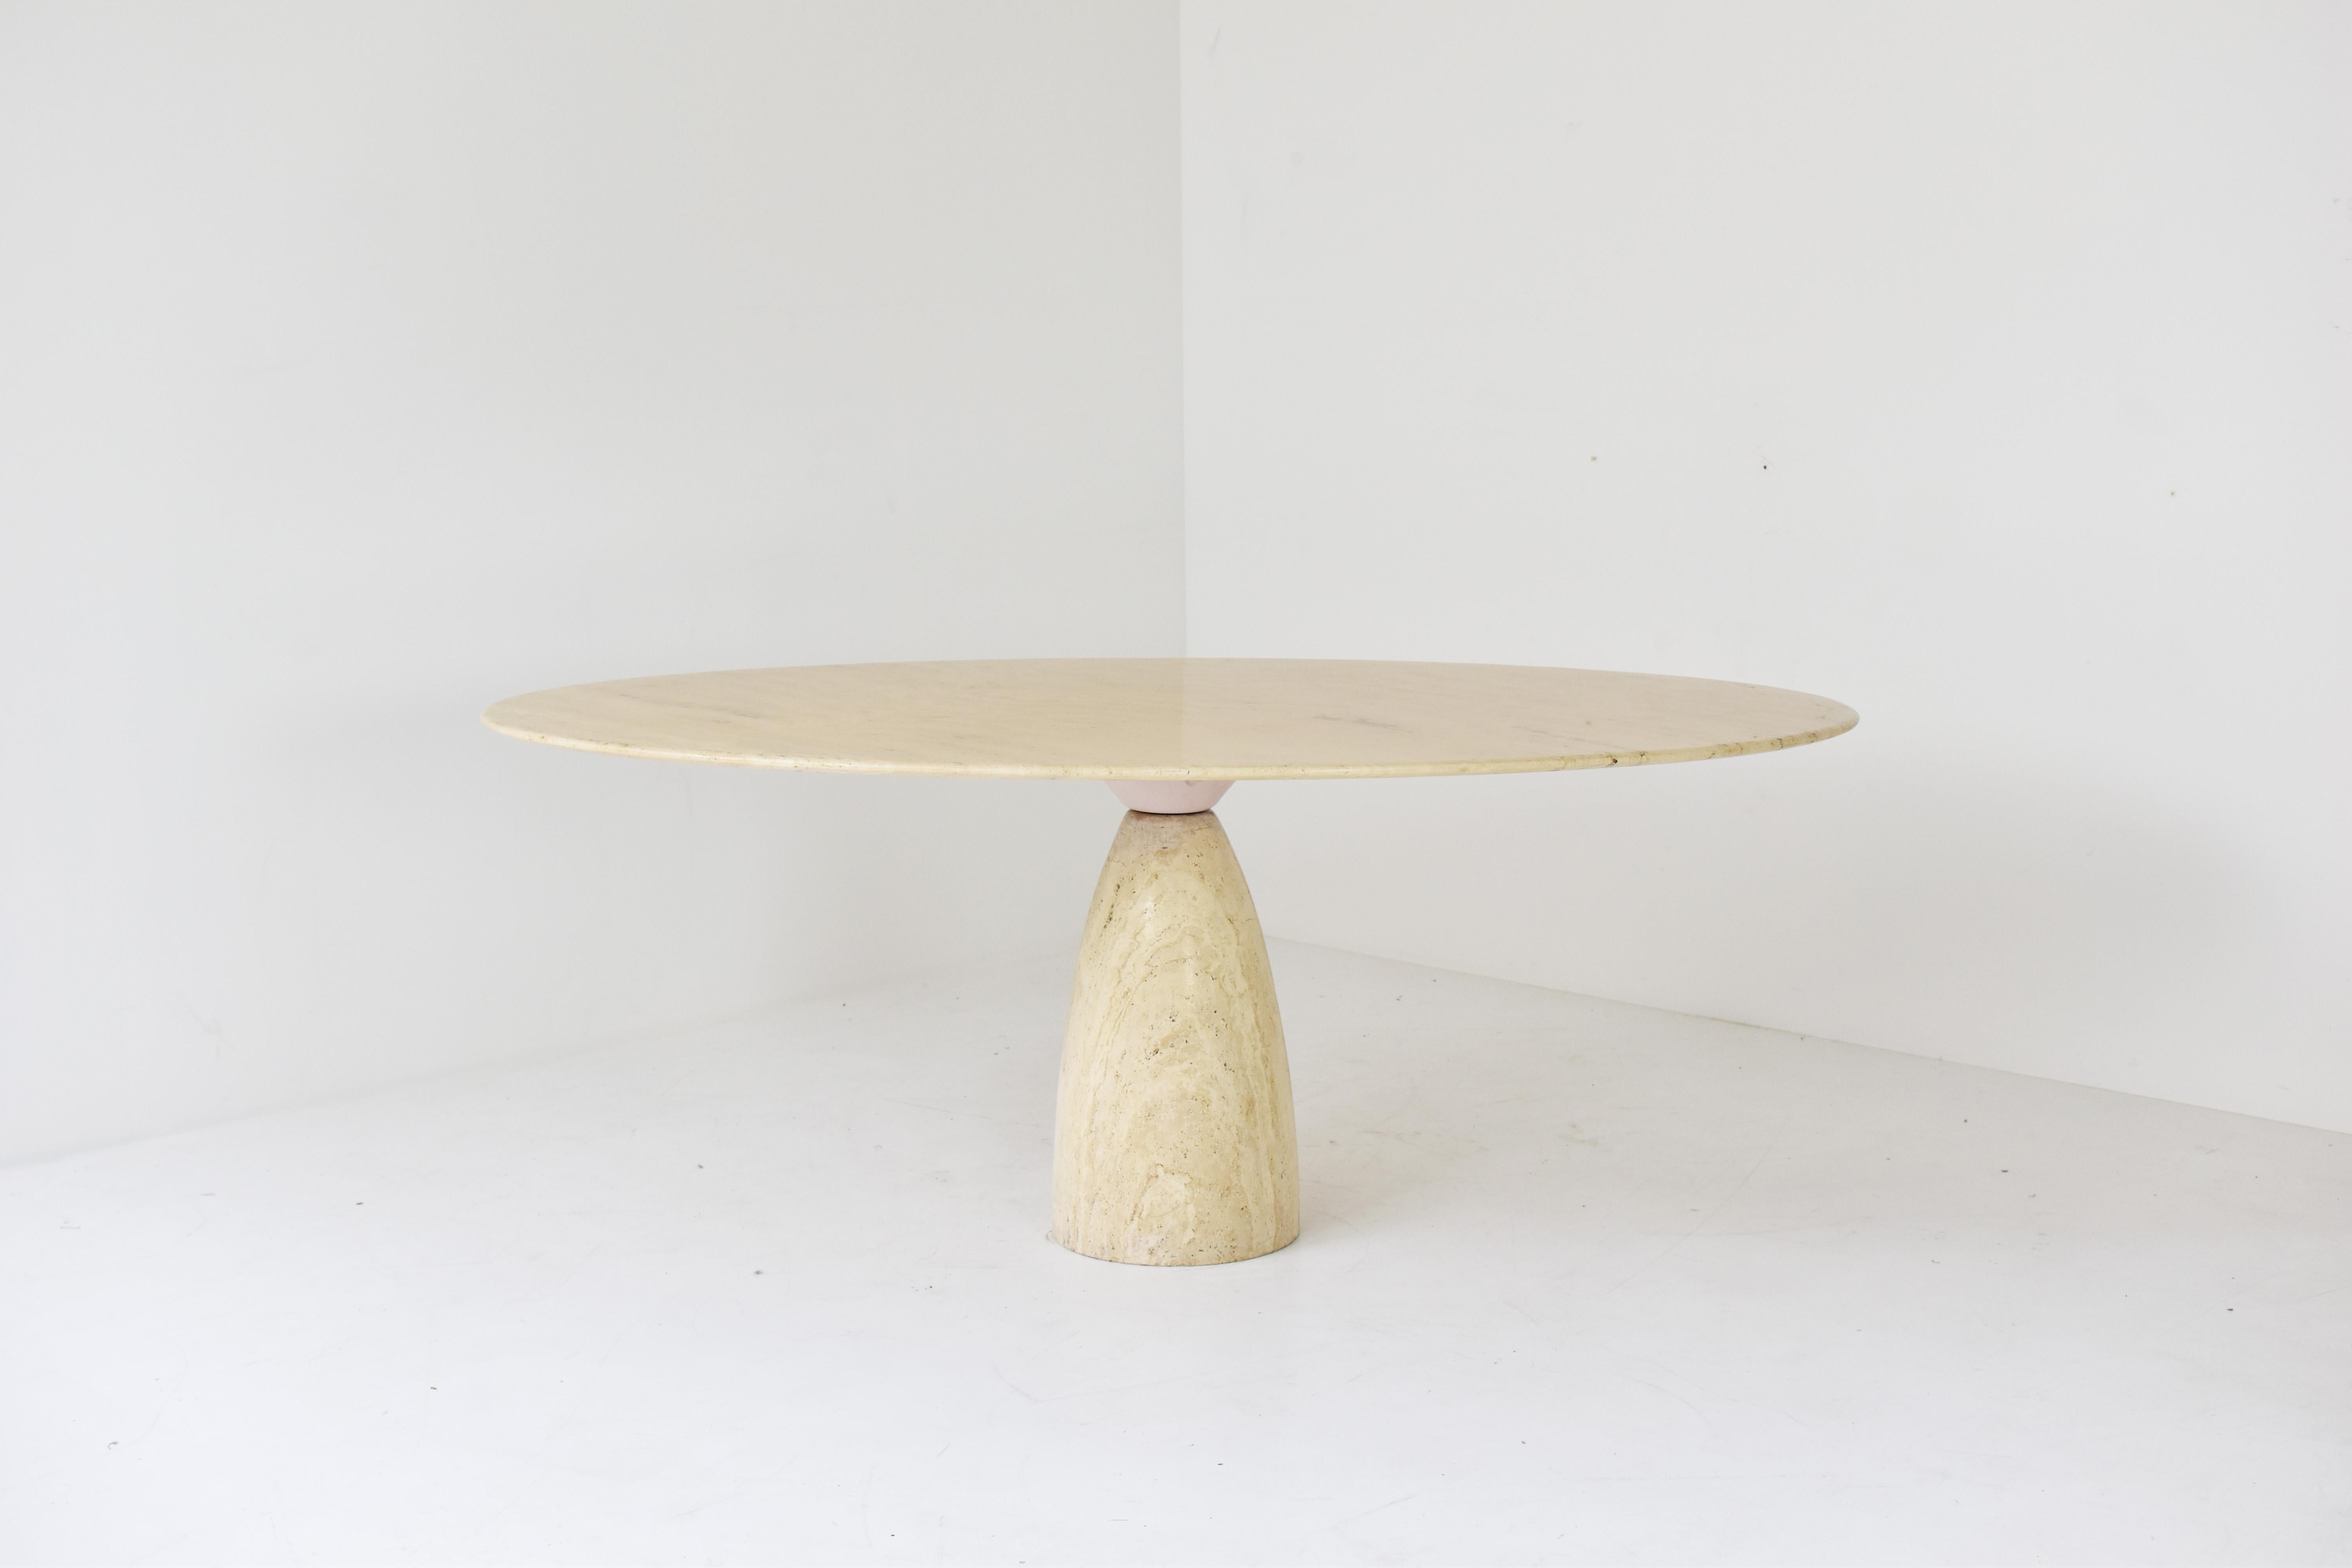 Rare ‘Finale’ oval dining table in travertine by Peter Draenert for Draenert, Germany 1970’s. The top and base are made of a massive travertine stone. Very well presented and original condition. Labeled underneath.